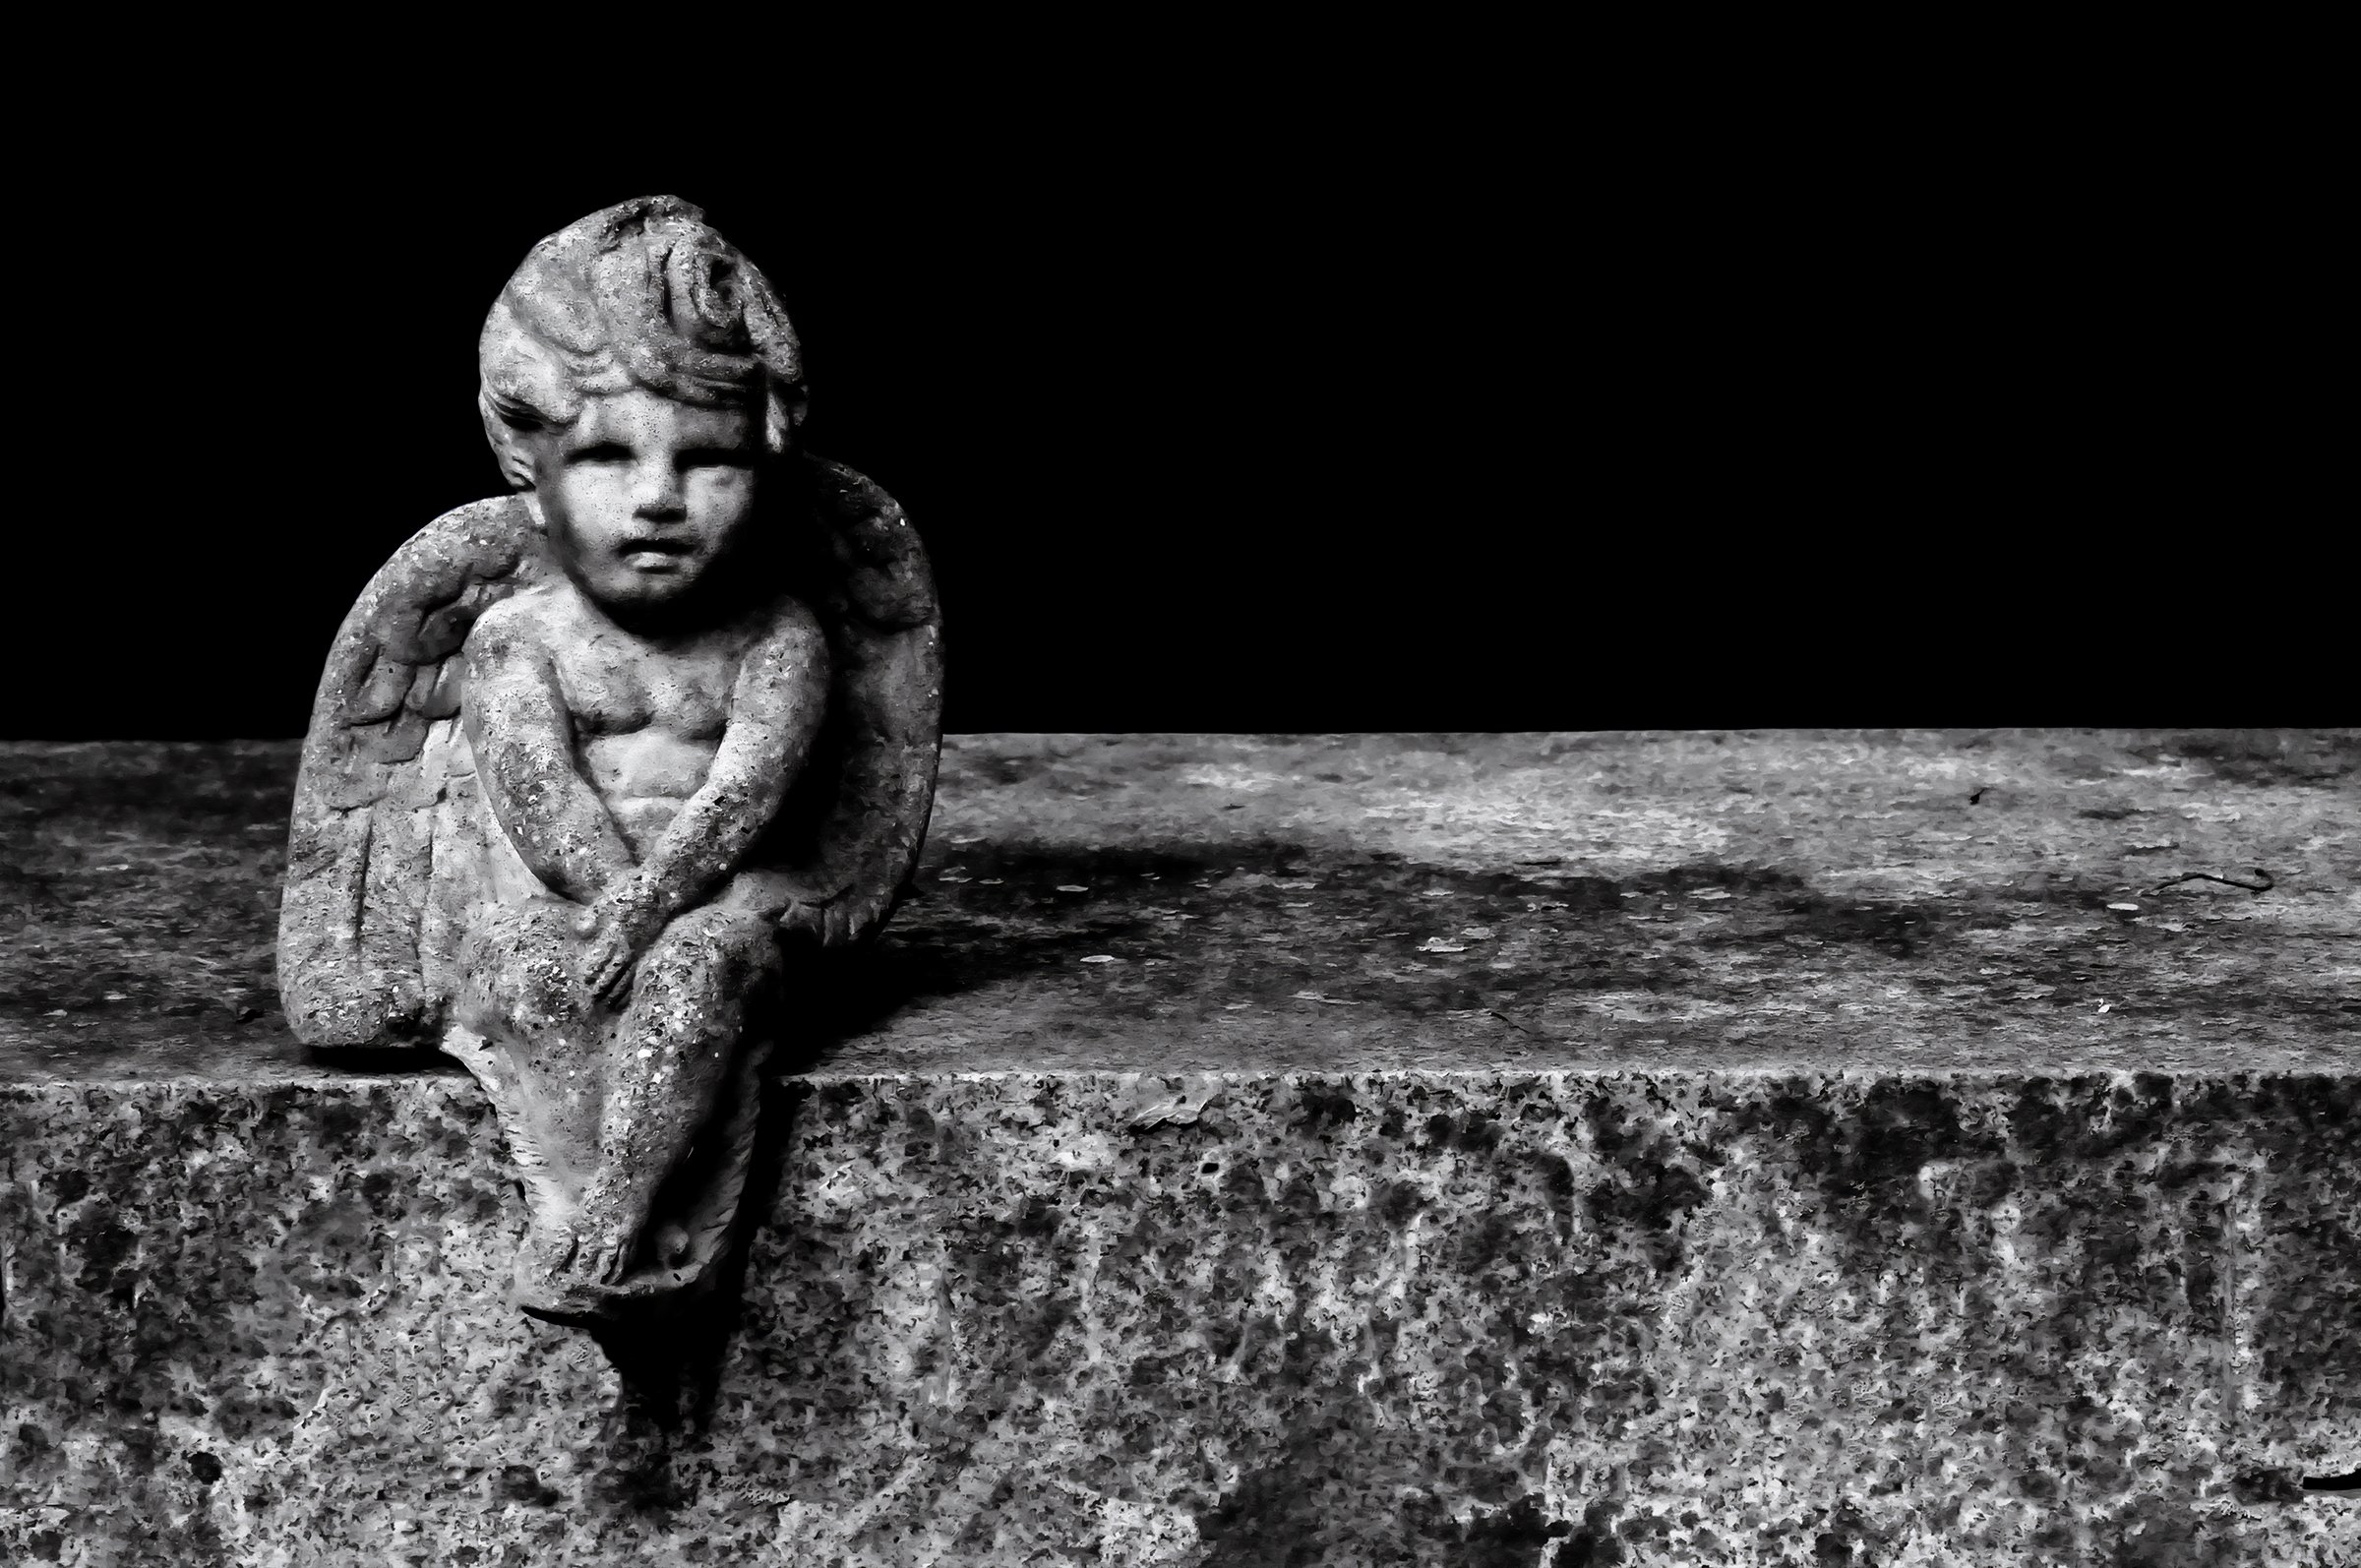 Musings of a Cherub on a Bench